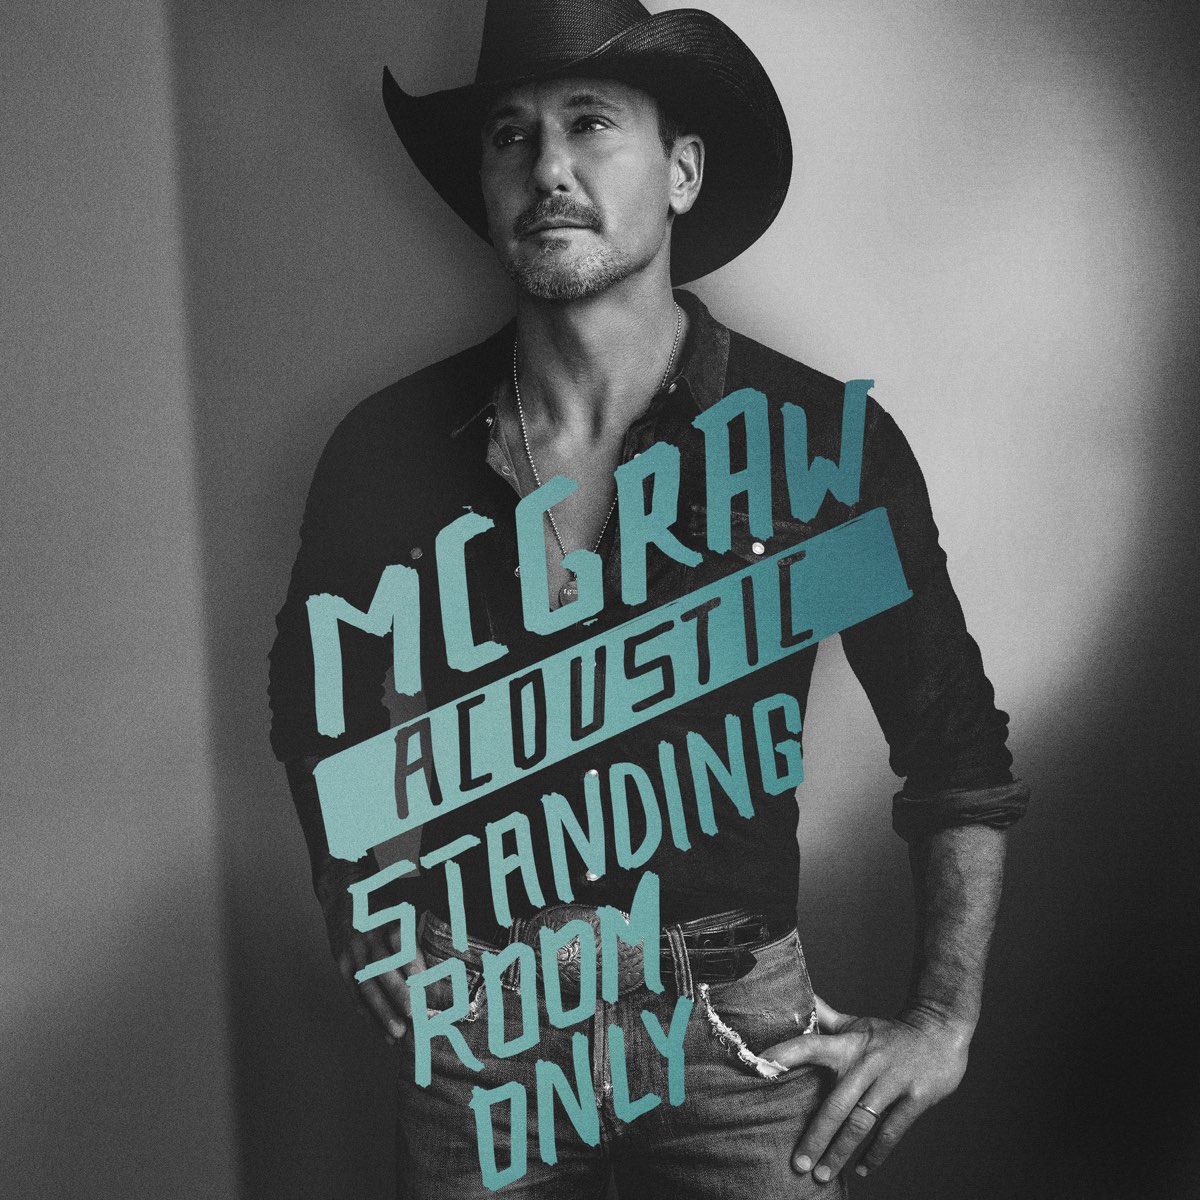 ‎Standing Room Only (Acoustic) Single Album by Tim McGraw Apple Music